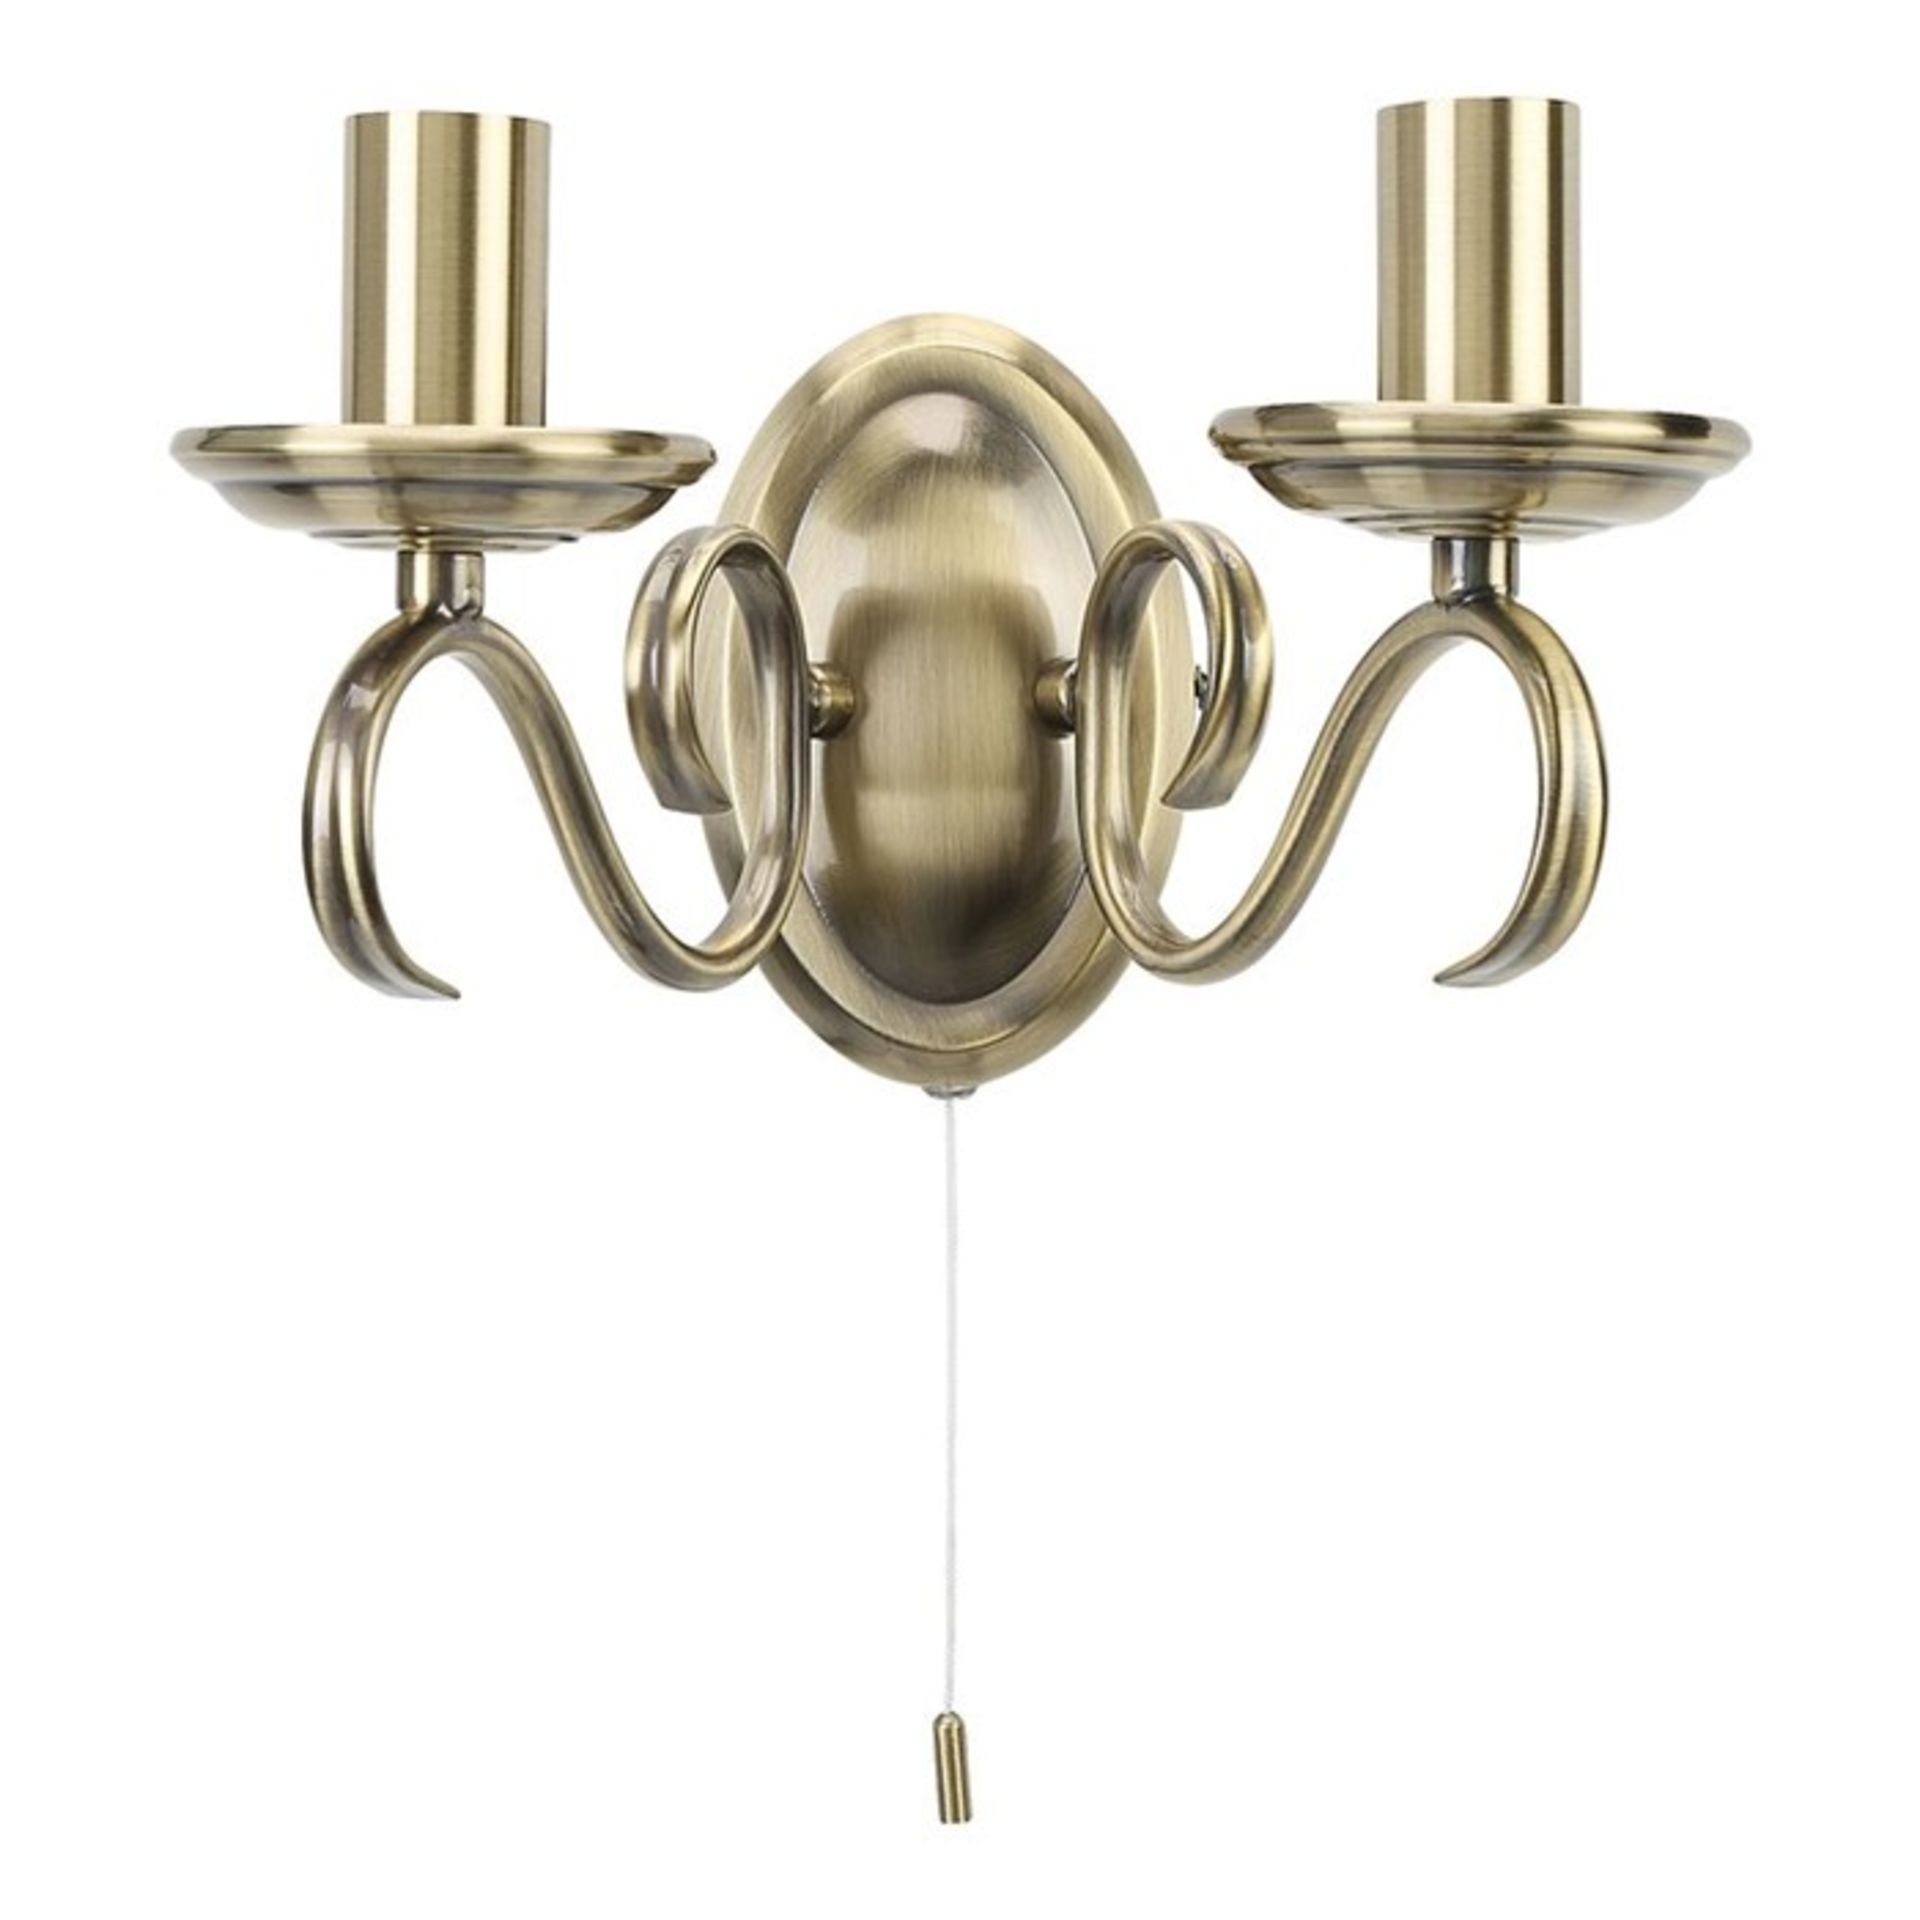 Marlow Home Co. Mona 2-Light Candle Wall Light (BRASS) ( UEL1476 - 14700/56) 7D - Image 2 of 2